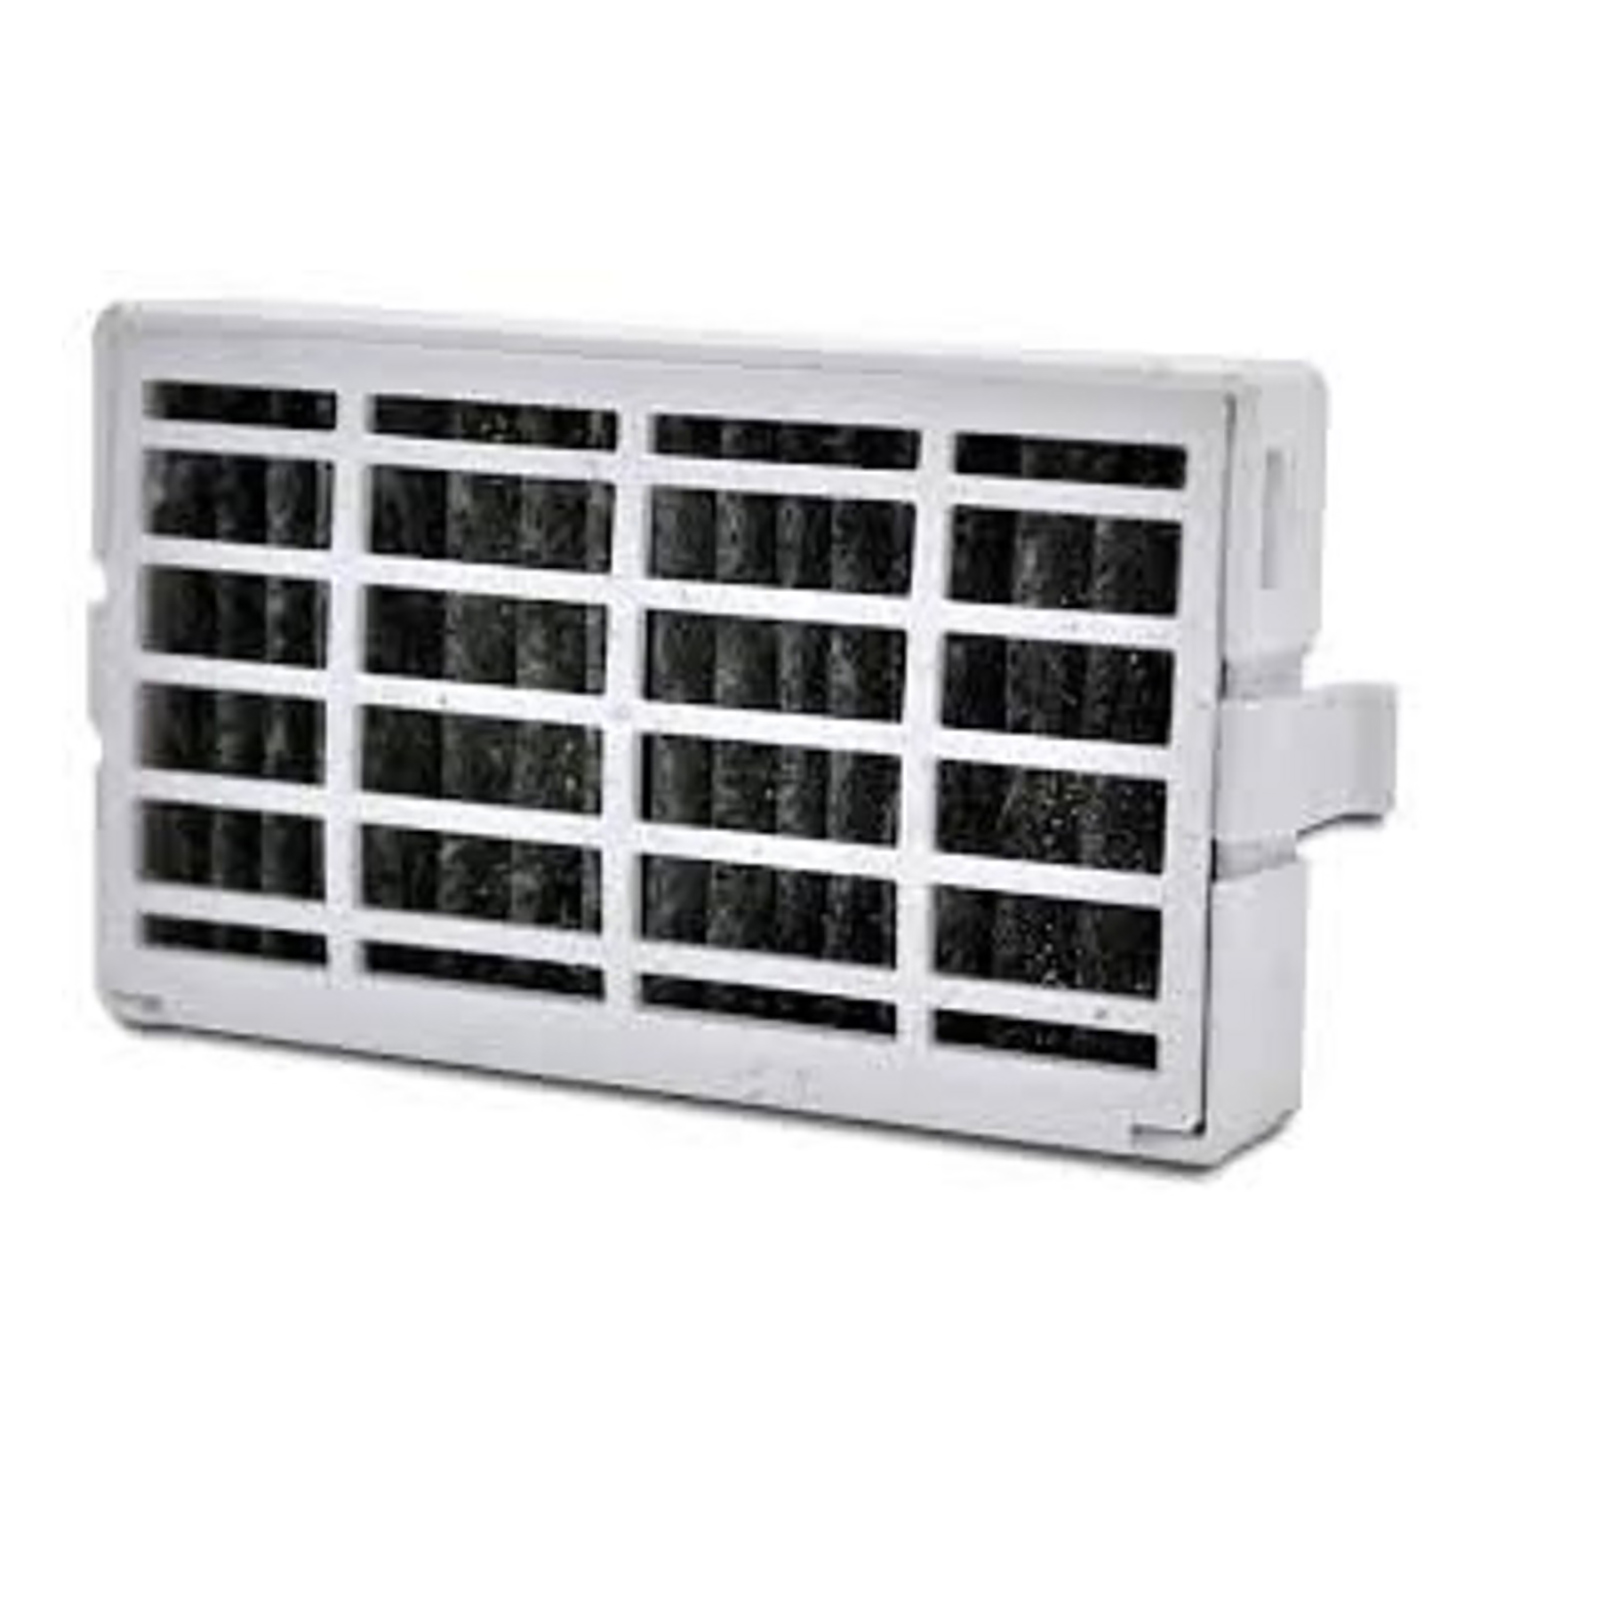 EDGEWATER PARTS W10311524 Air Filter for Whirlpool Refrigerator